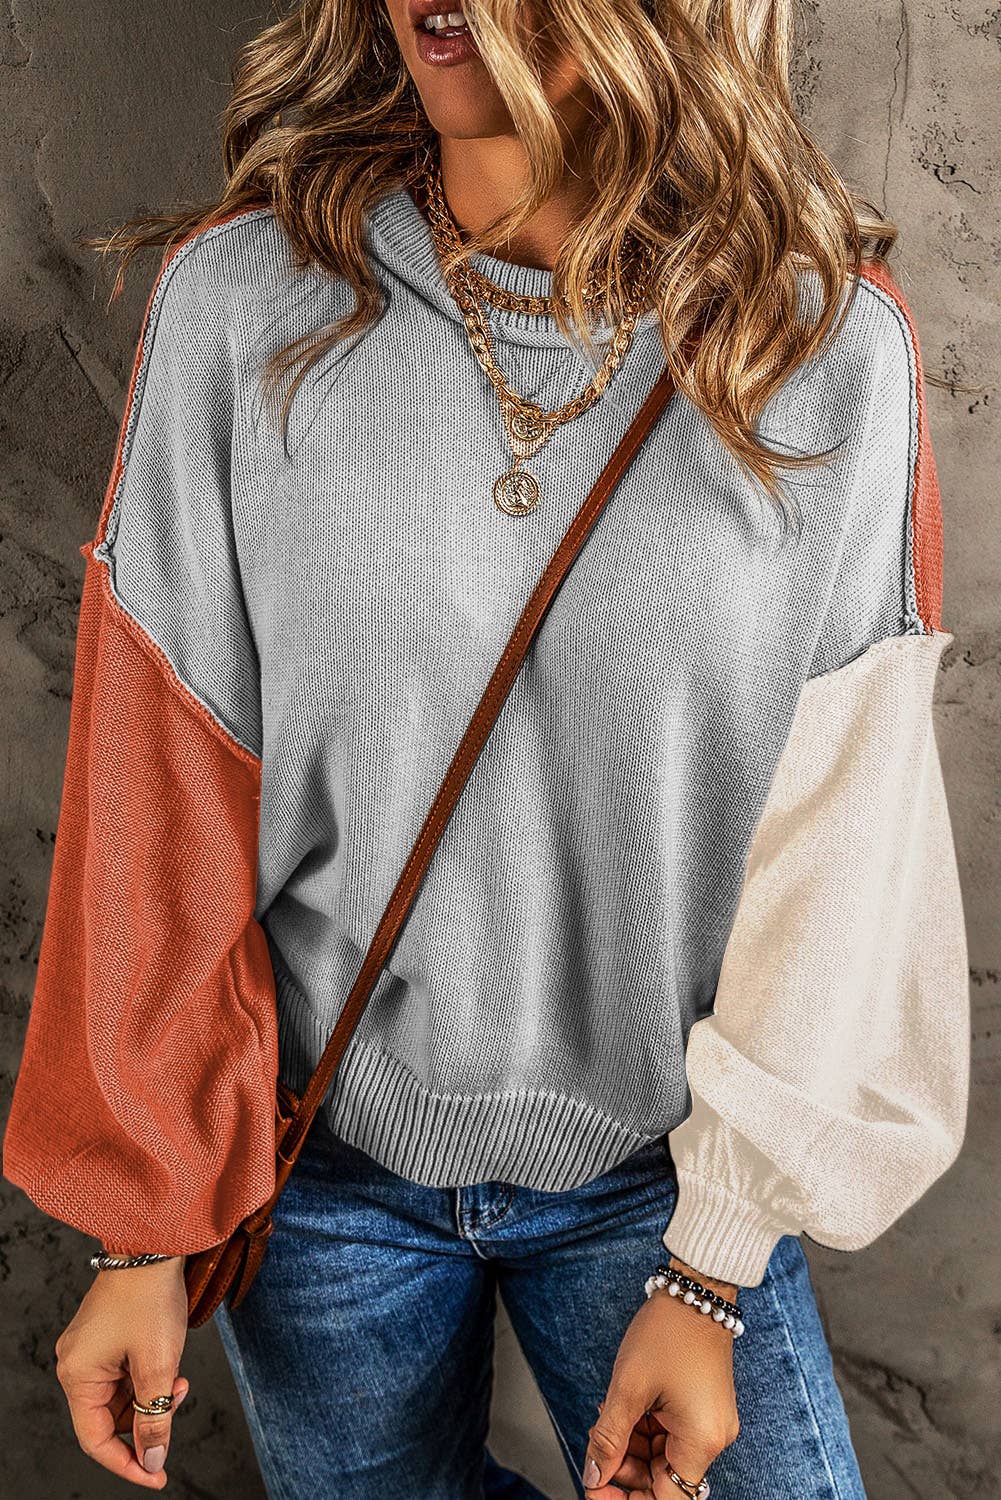 Little Daisy Closet - Colorblock Sweater with Statement Bishop Sleeves